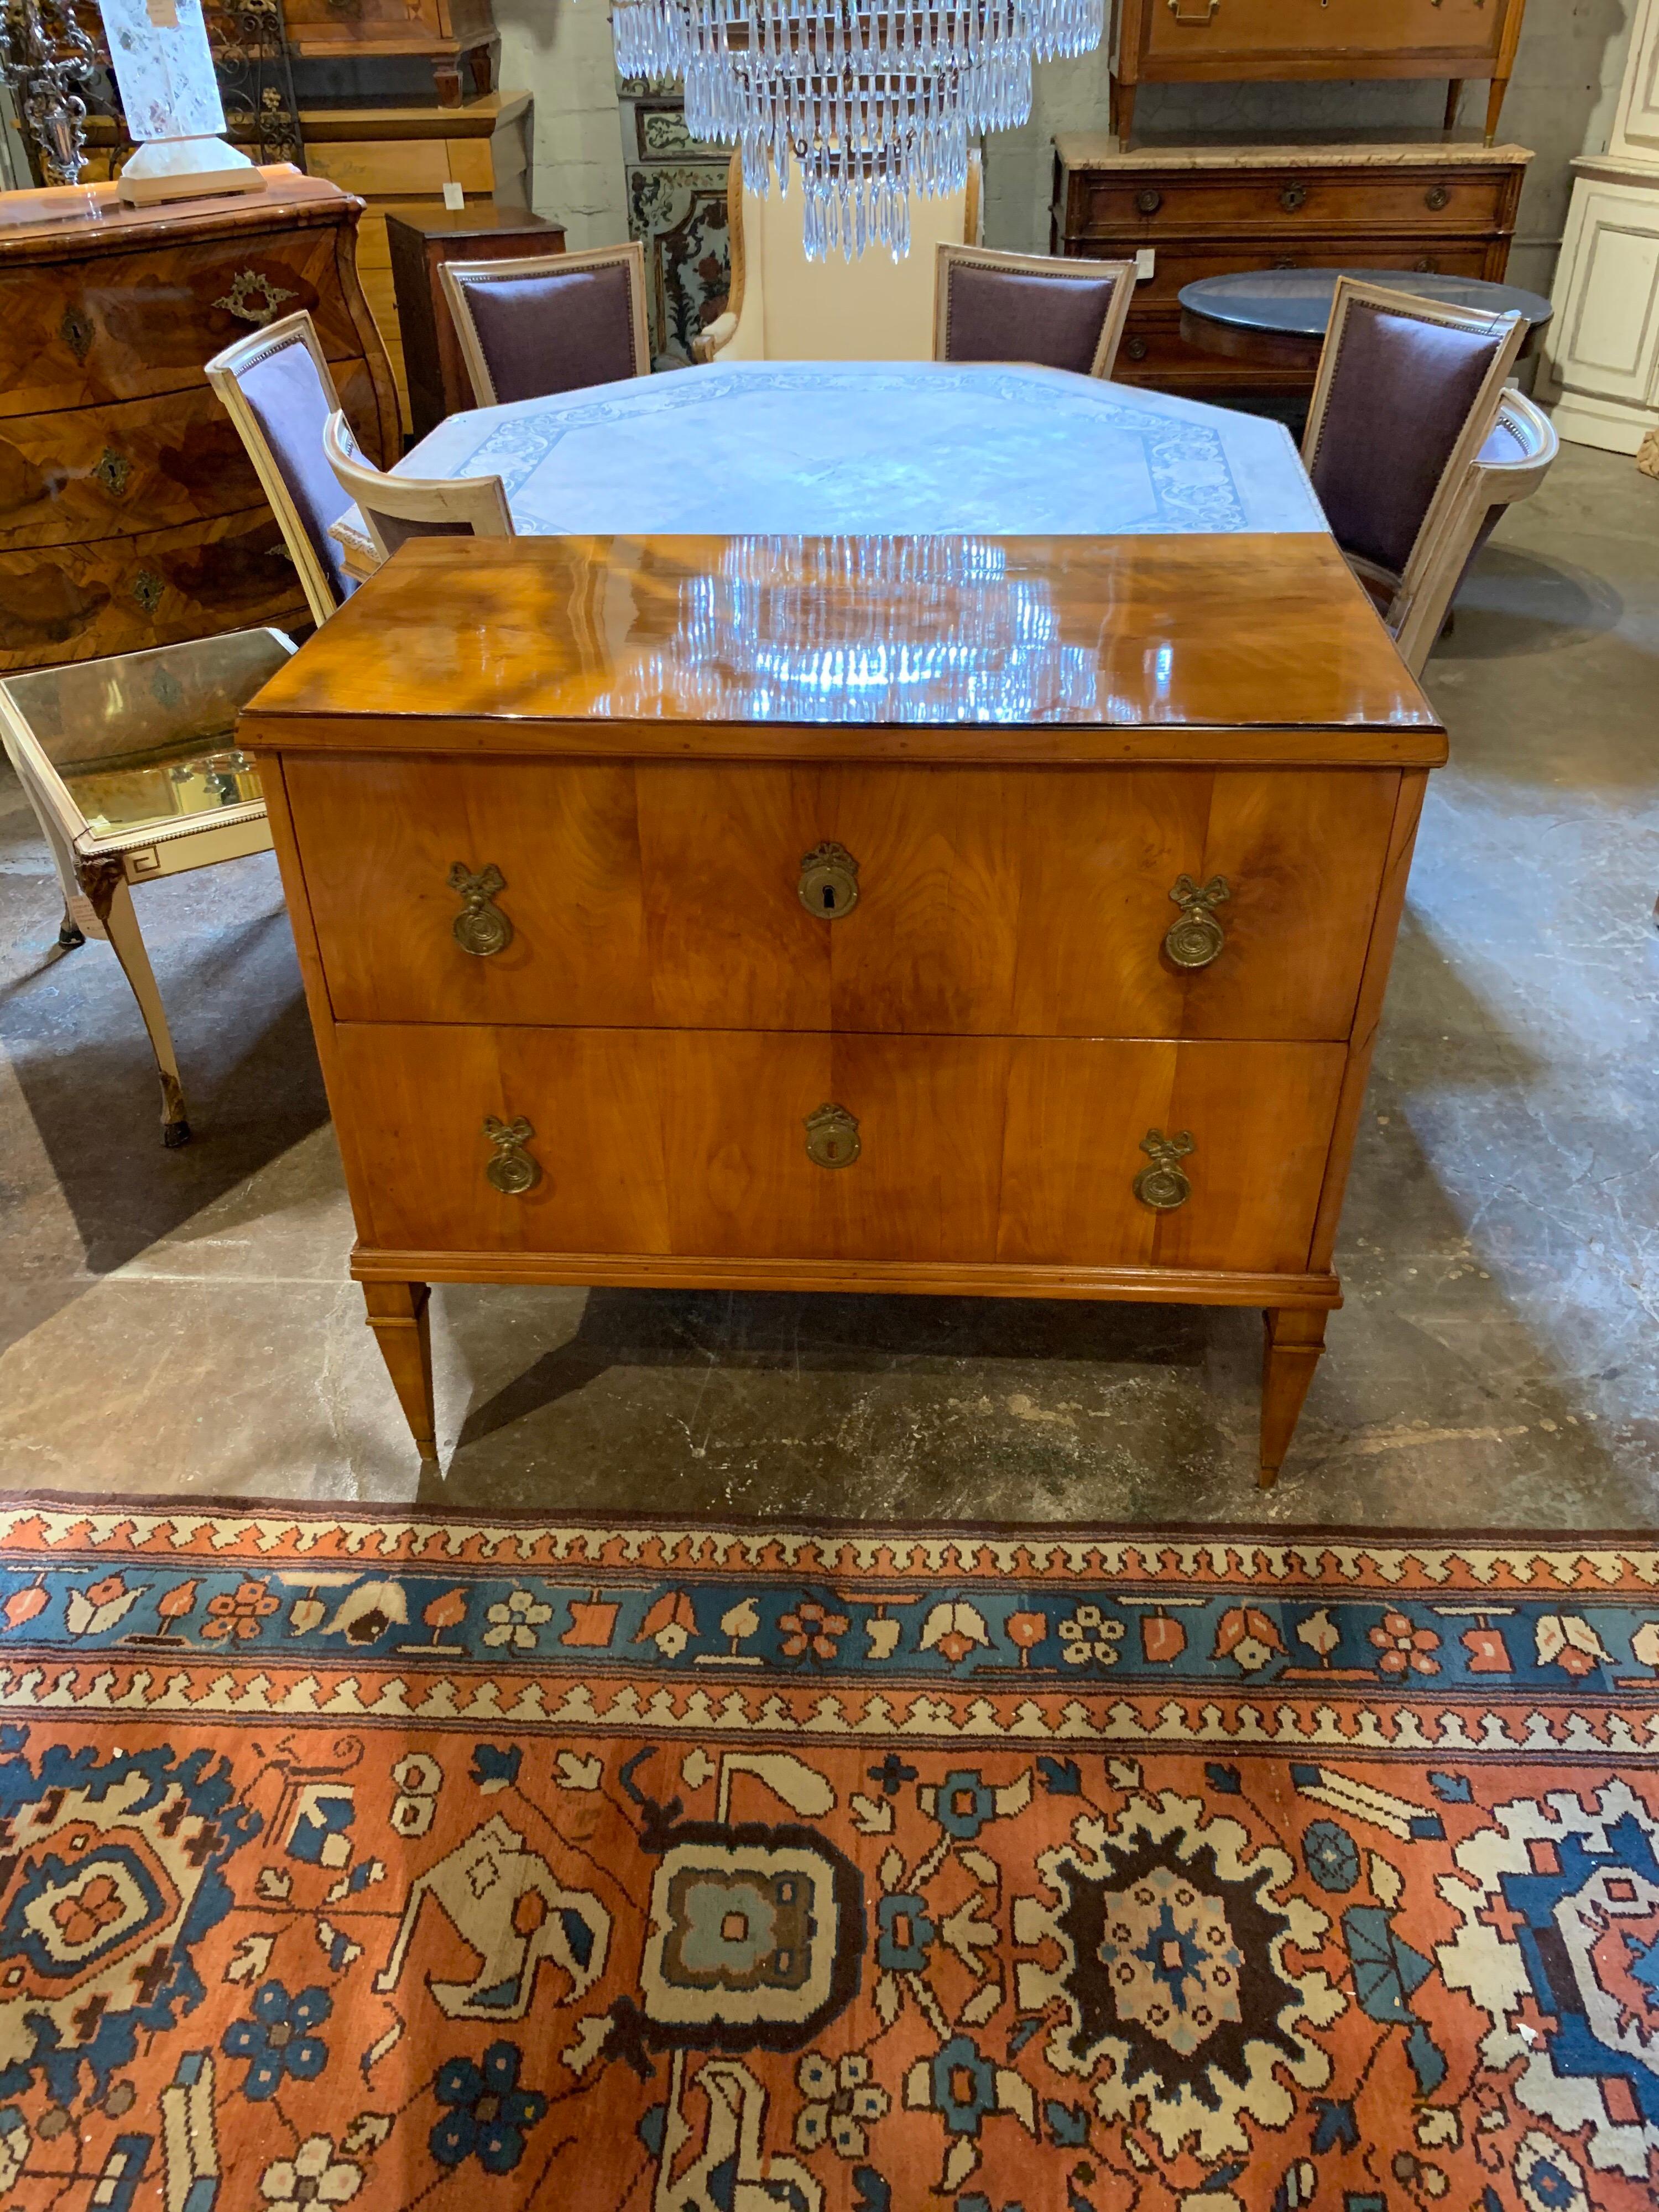 Exceptional 19th century Austrian Biedermeier walnut commode with nice brass hardware. Beautiful finish and nice clean lines. A lovely Classic style!